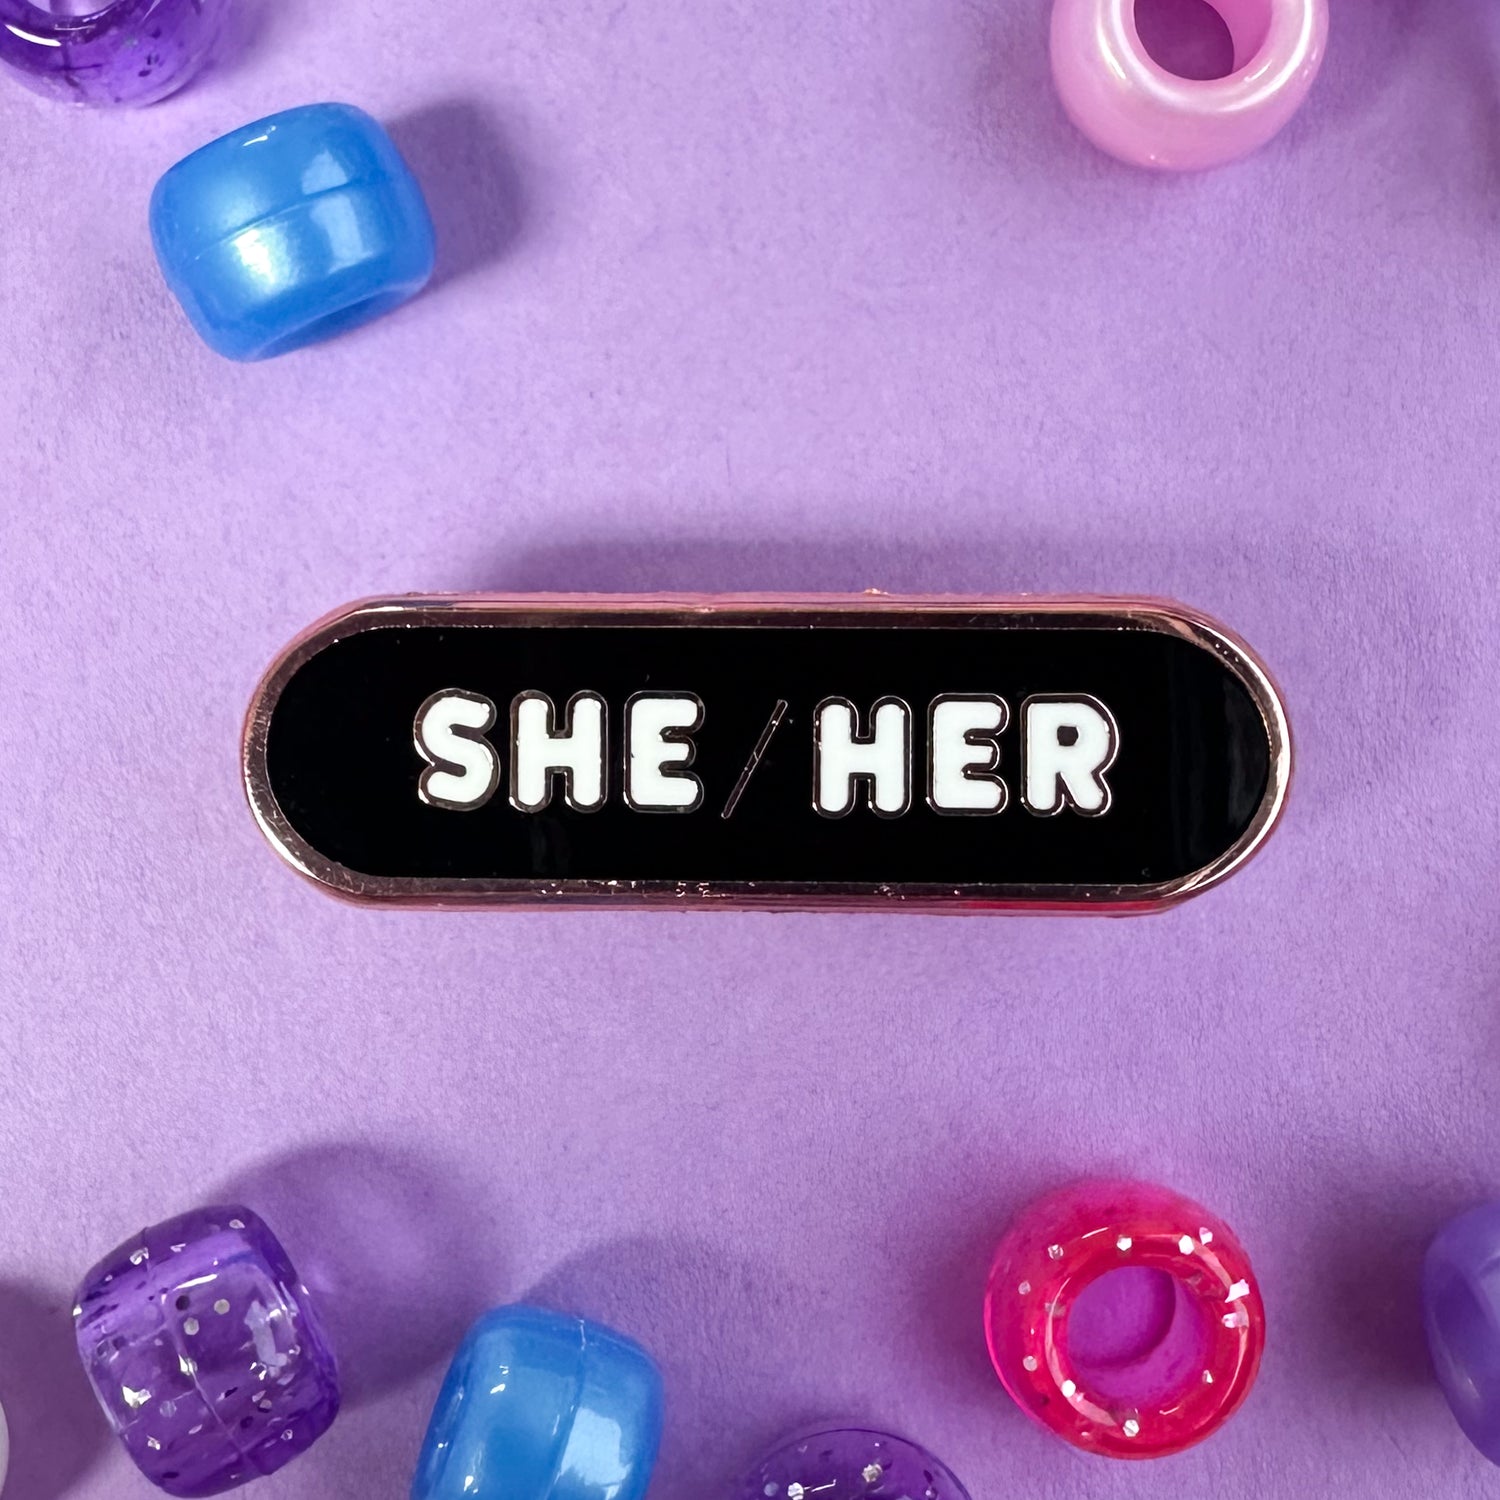 A capsule shaped pin with the pronouns "She/Her" on it. The pin is on a lavender background with blue, purple, and pink pony beads scattered around it. 